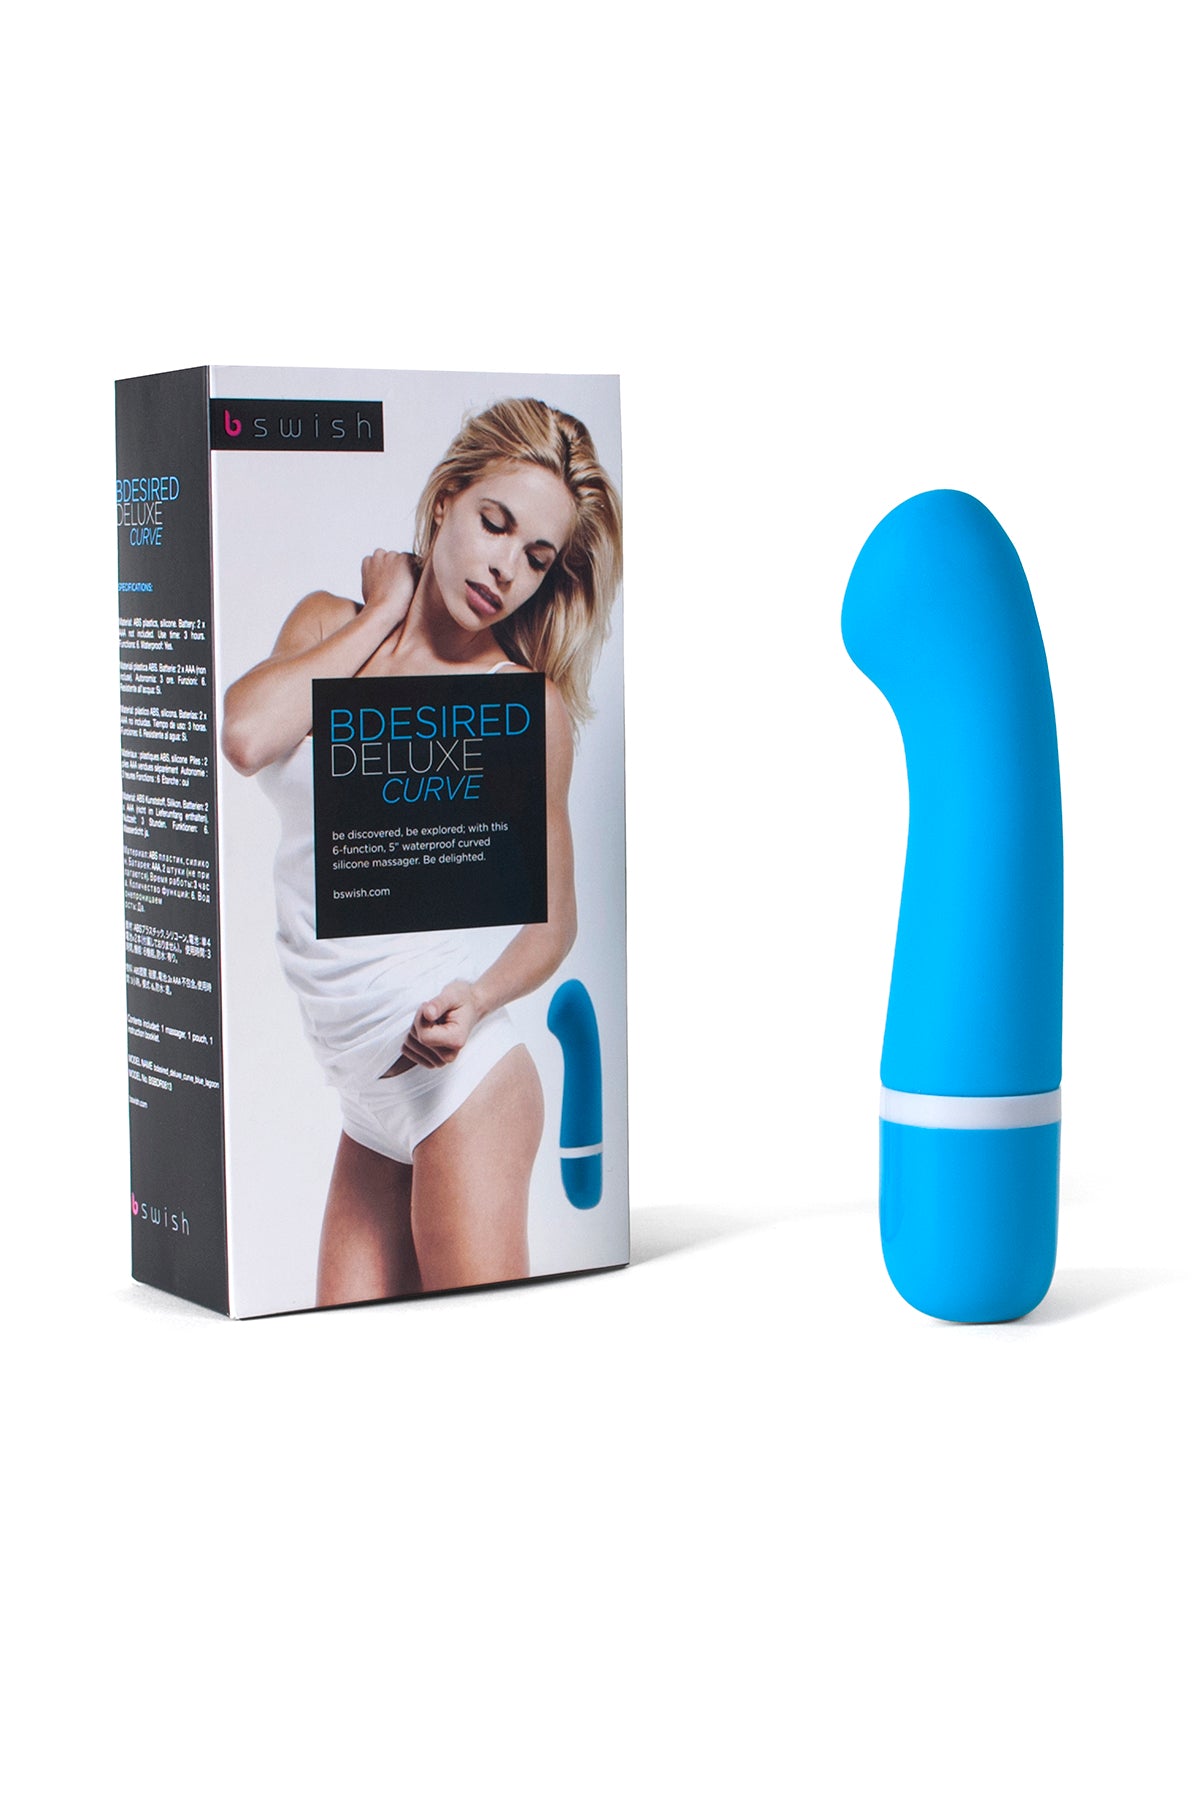 Bdesired Deluxe Curve Blue Lagoon - Just for you desires